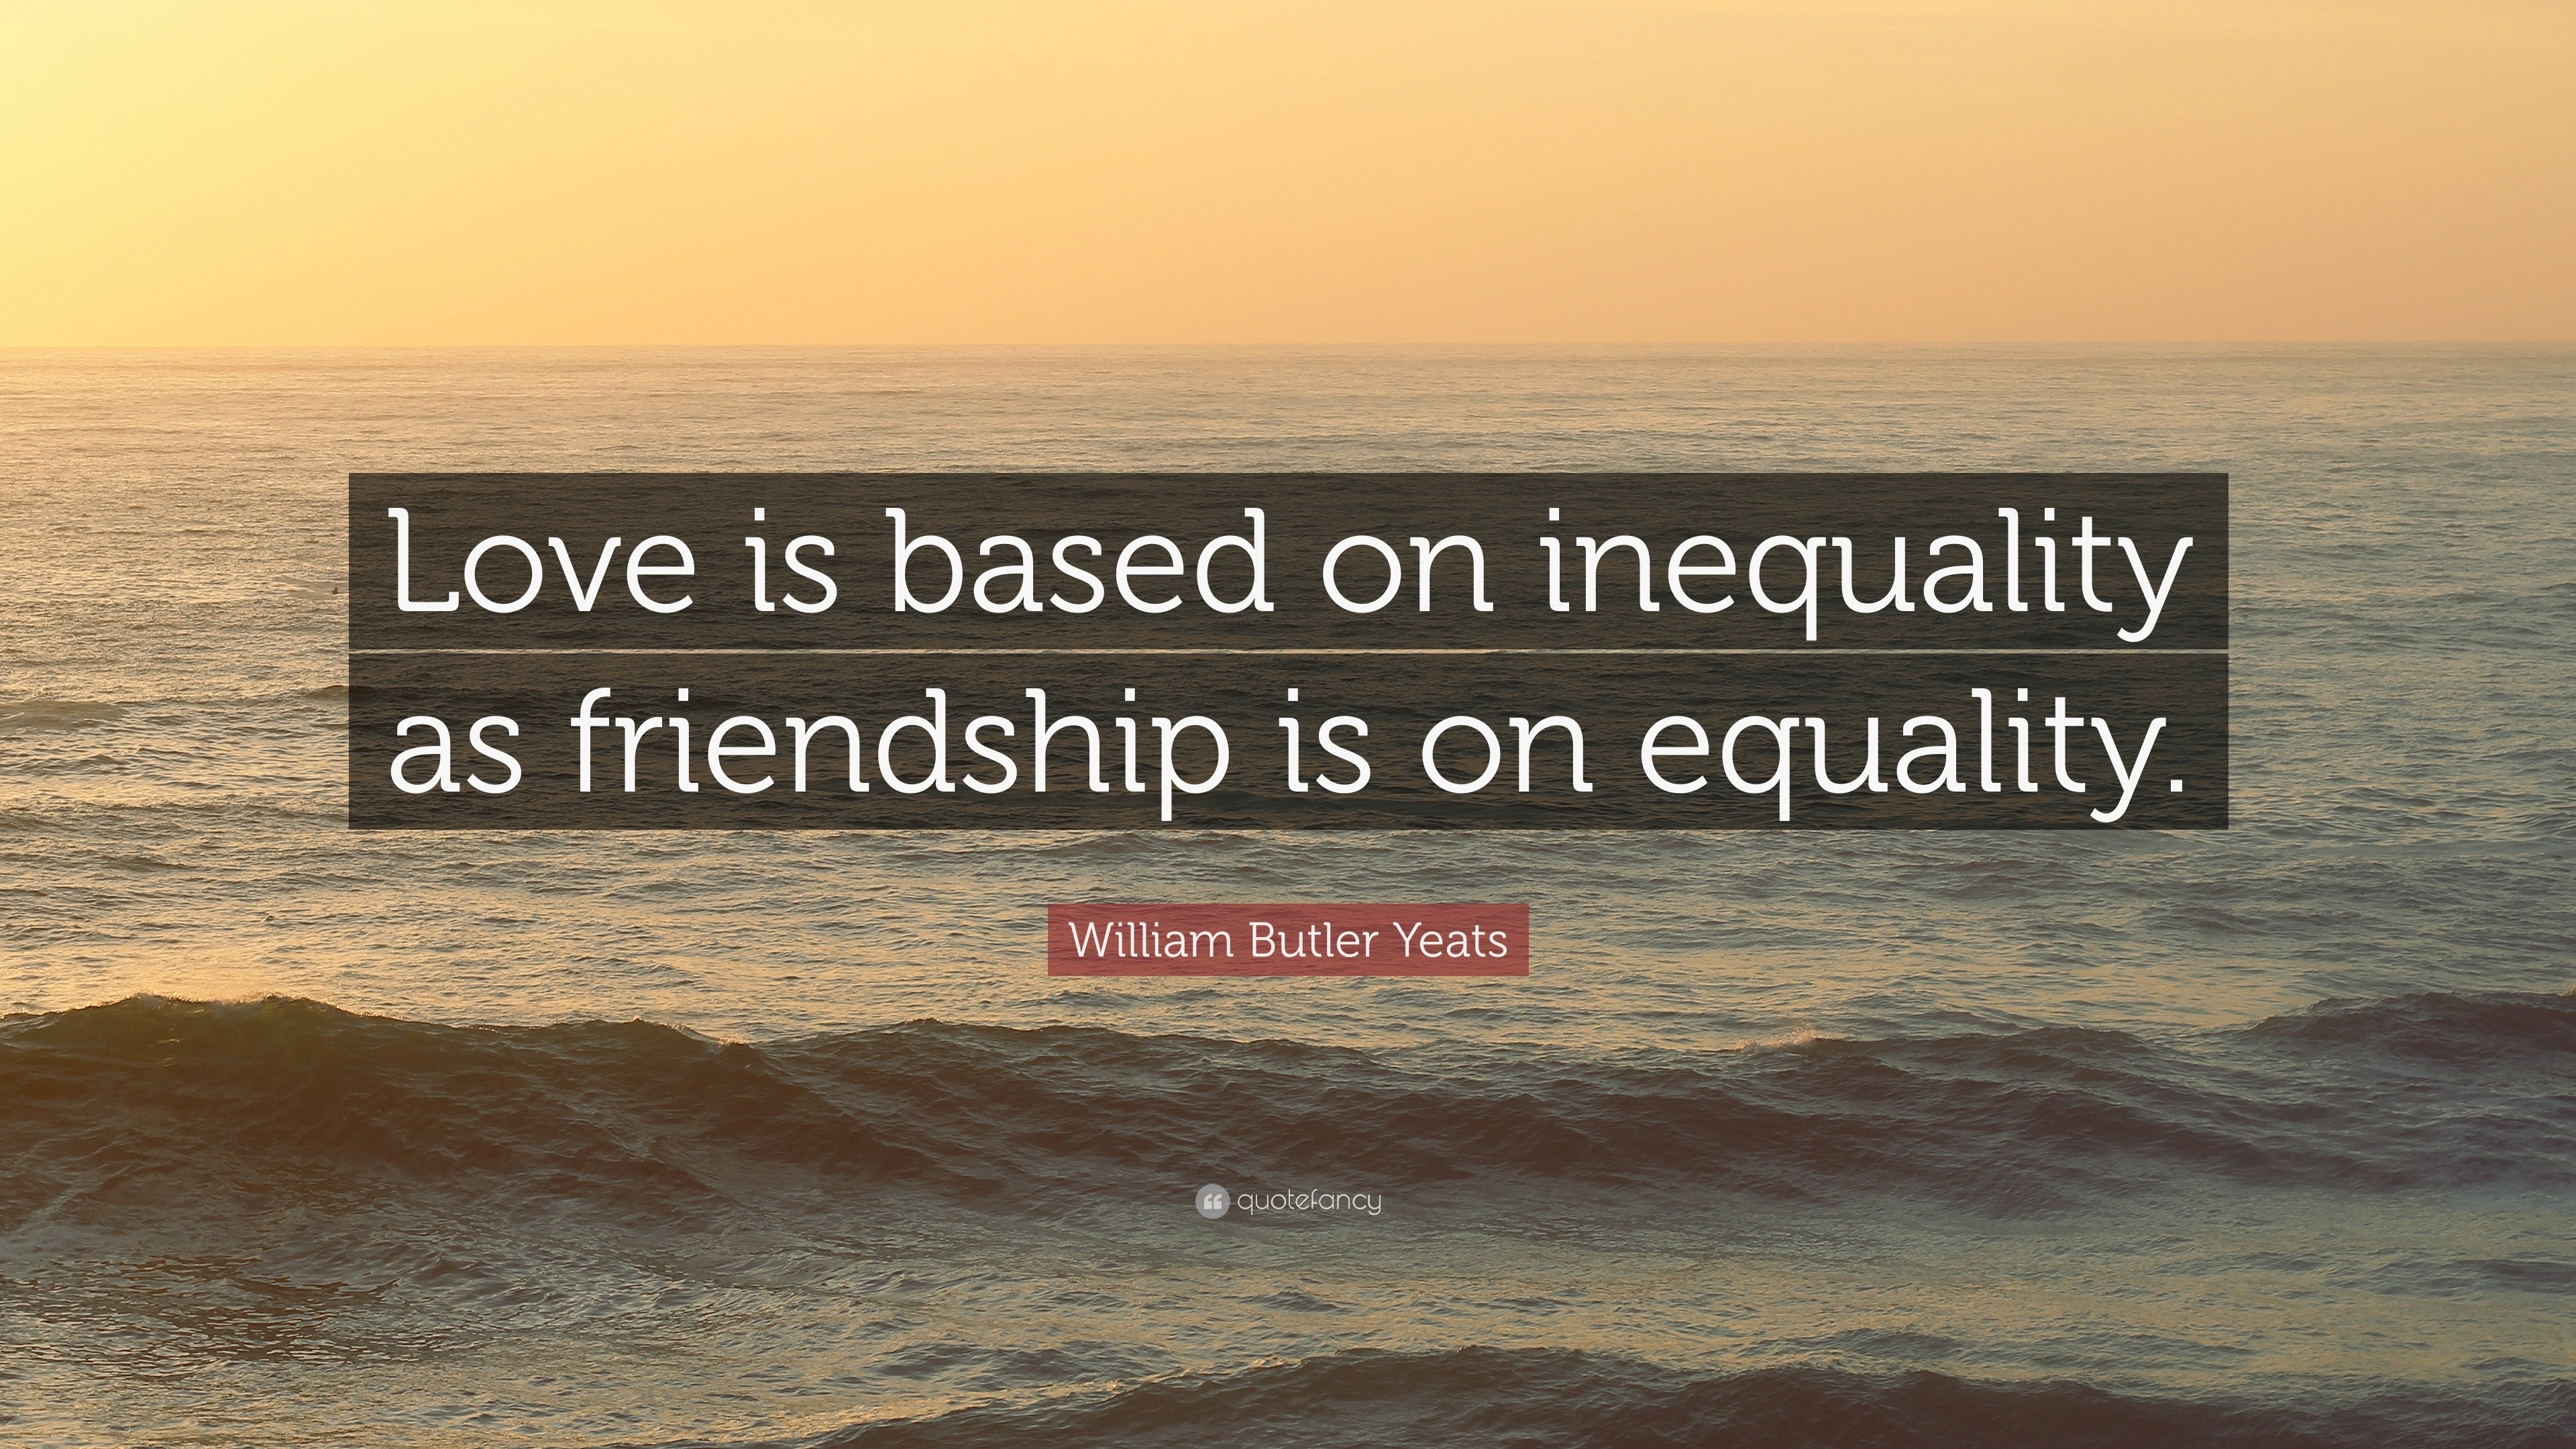 William Butler Yeats Quote “Love is based on inequality as friendship